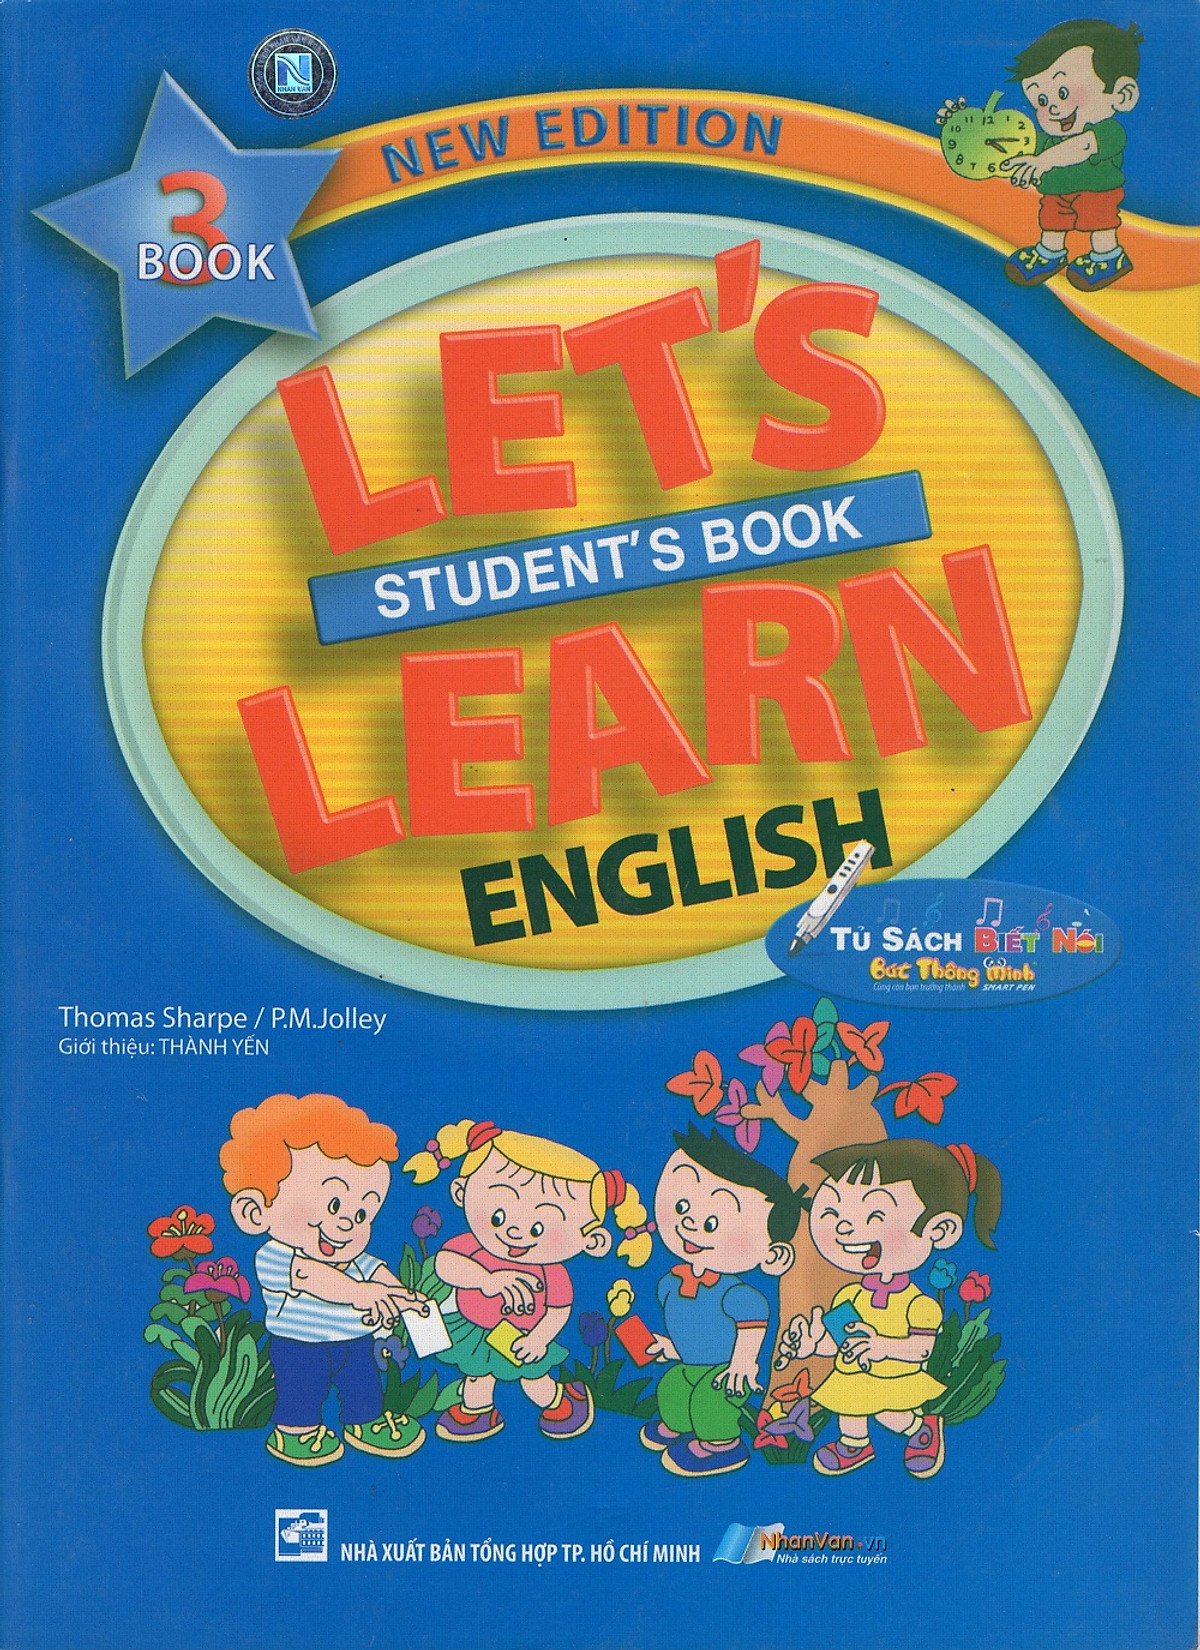 Let's Learn English - Student's Book 3 (New Edition)